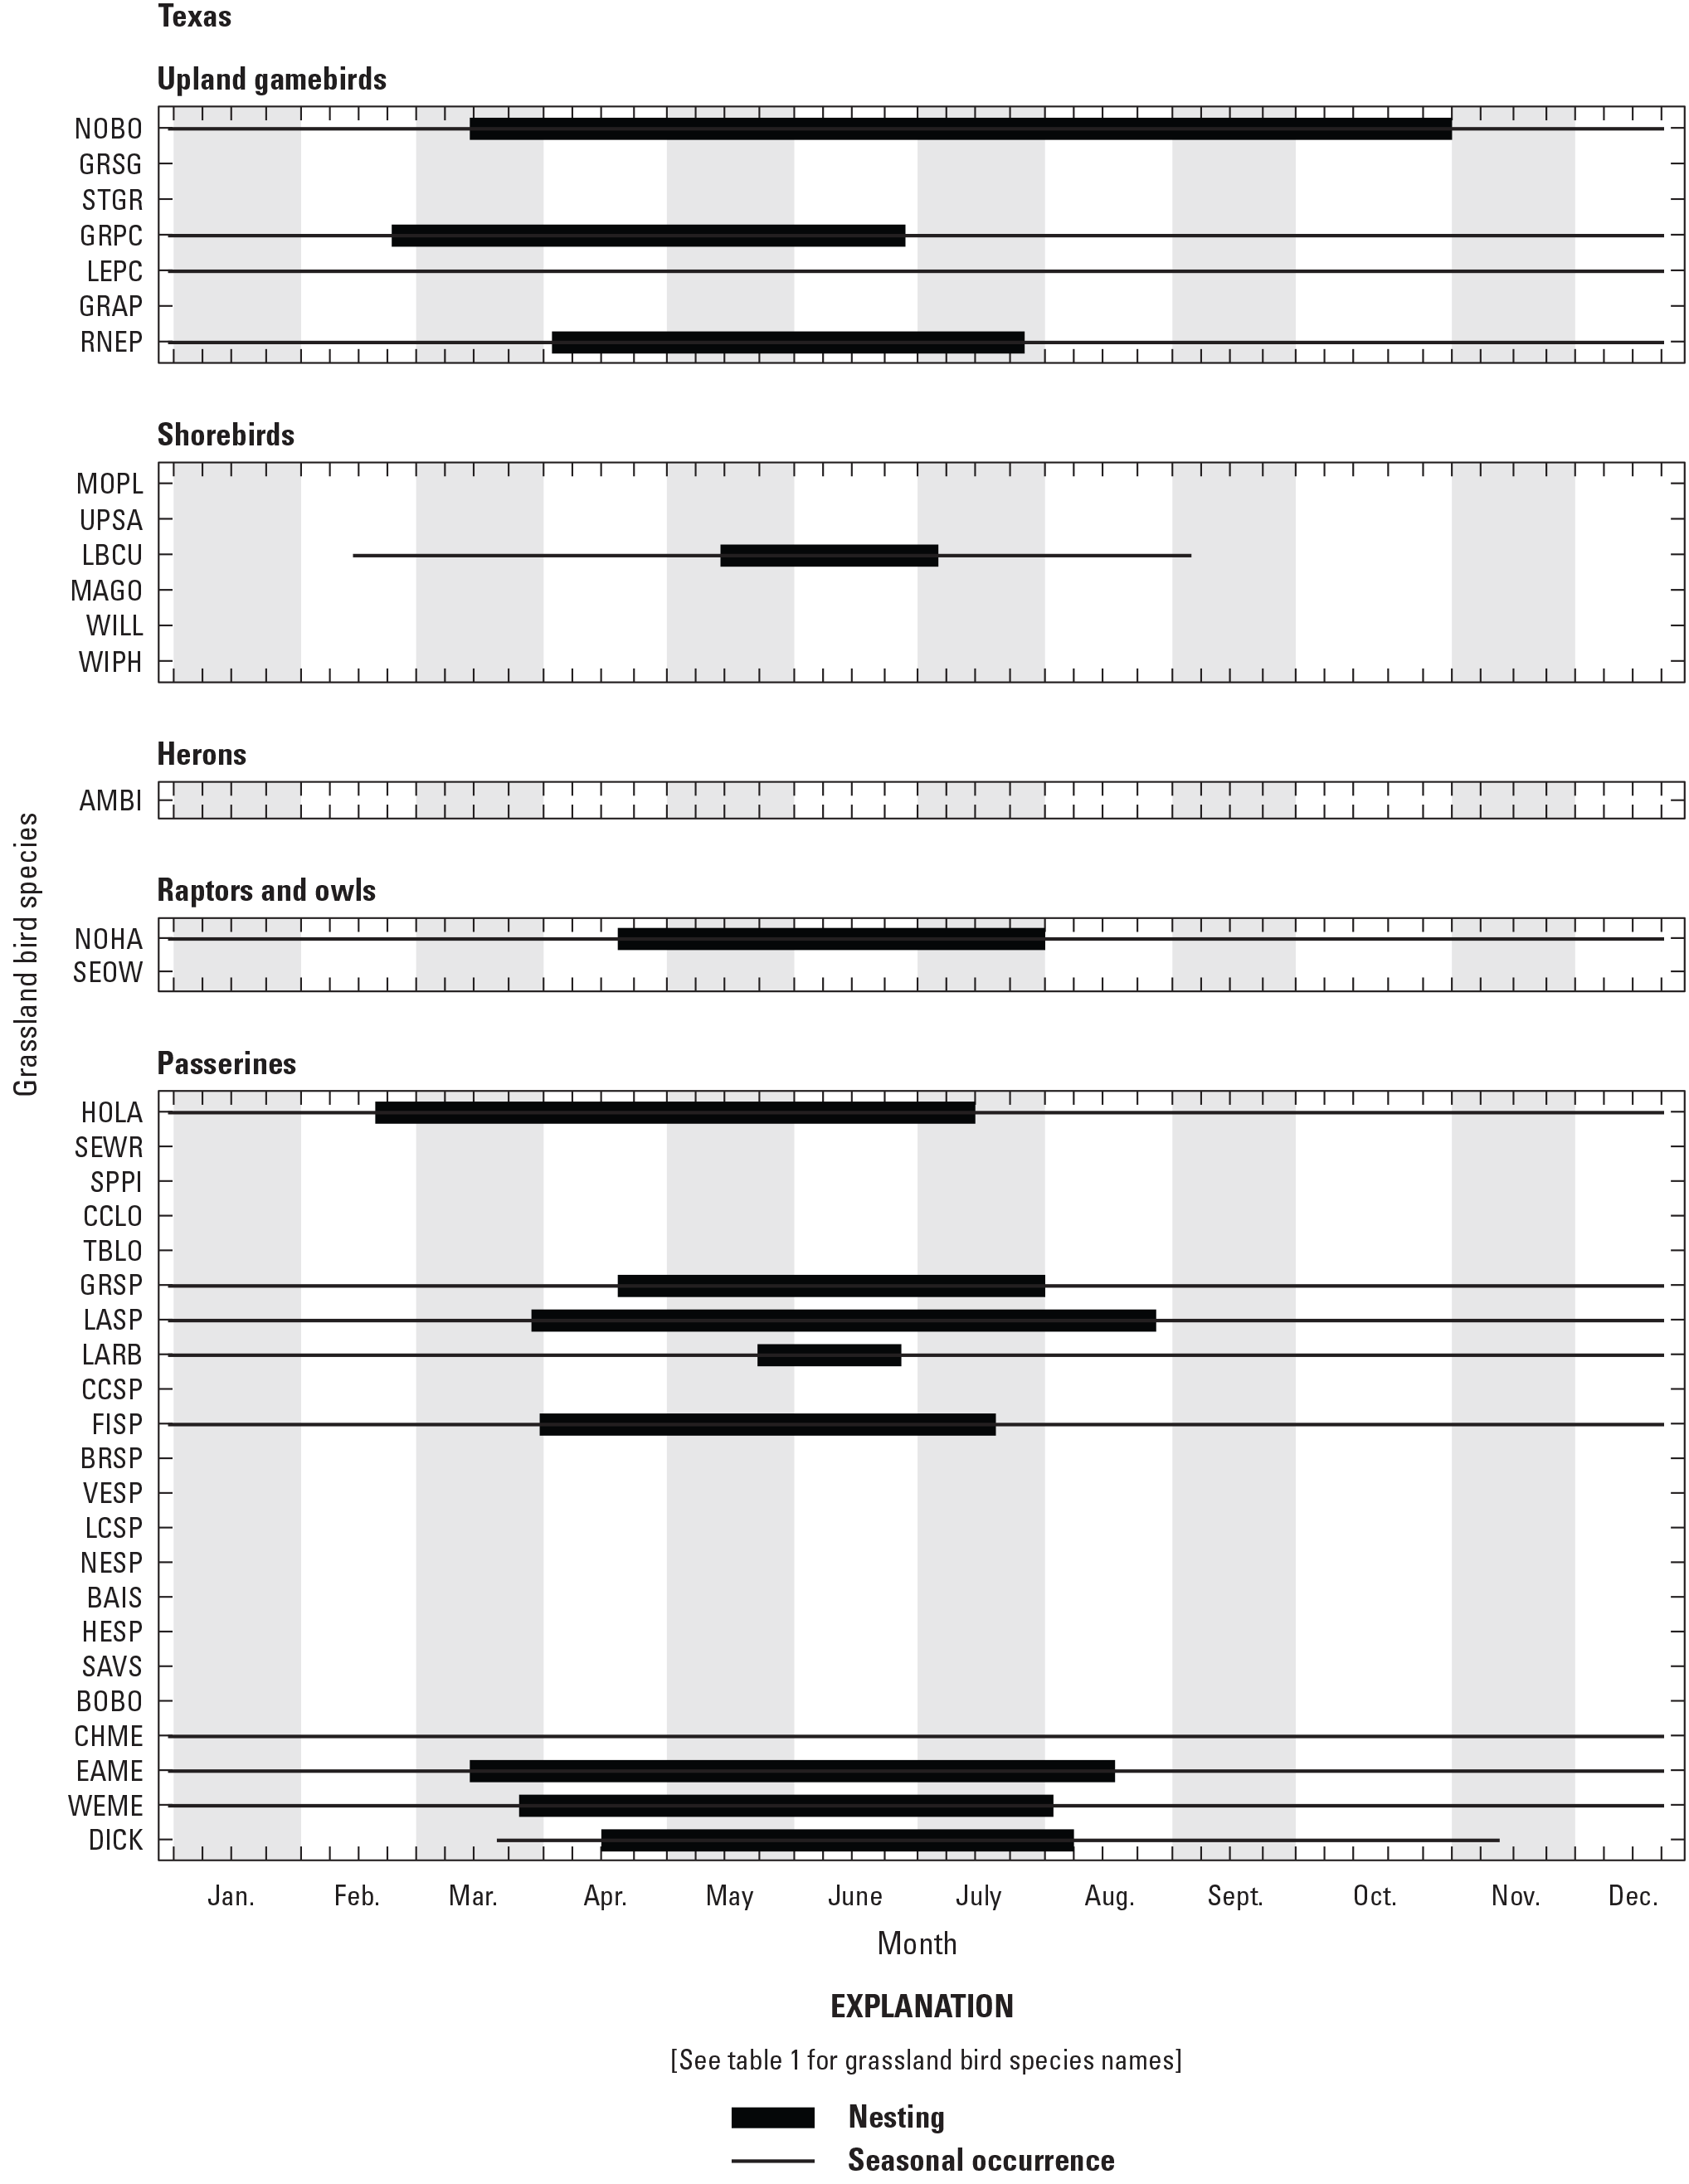 Figure showing seasonal occurrence and nesting phenology for 38 grassland bird species
               in Texas, United States.